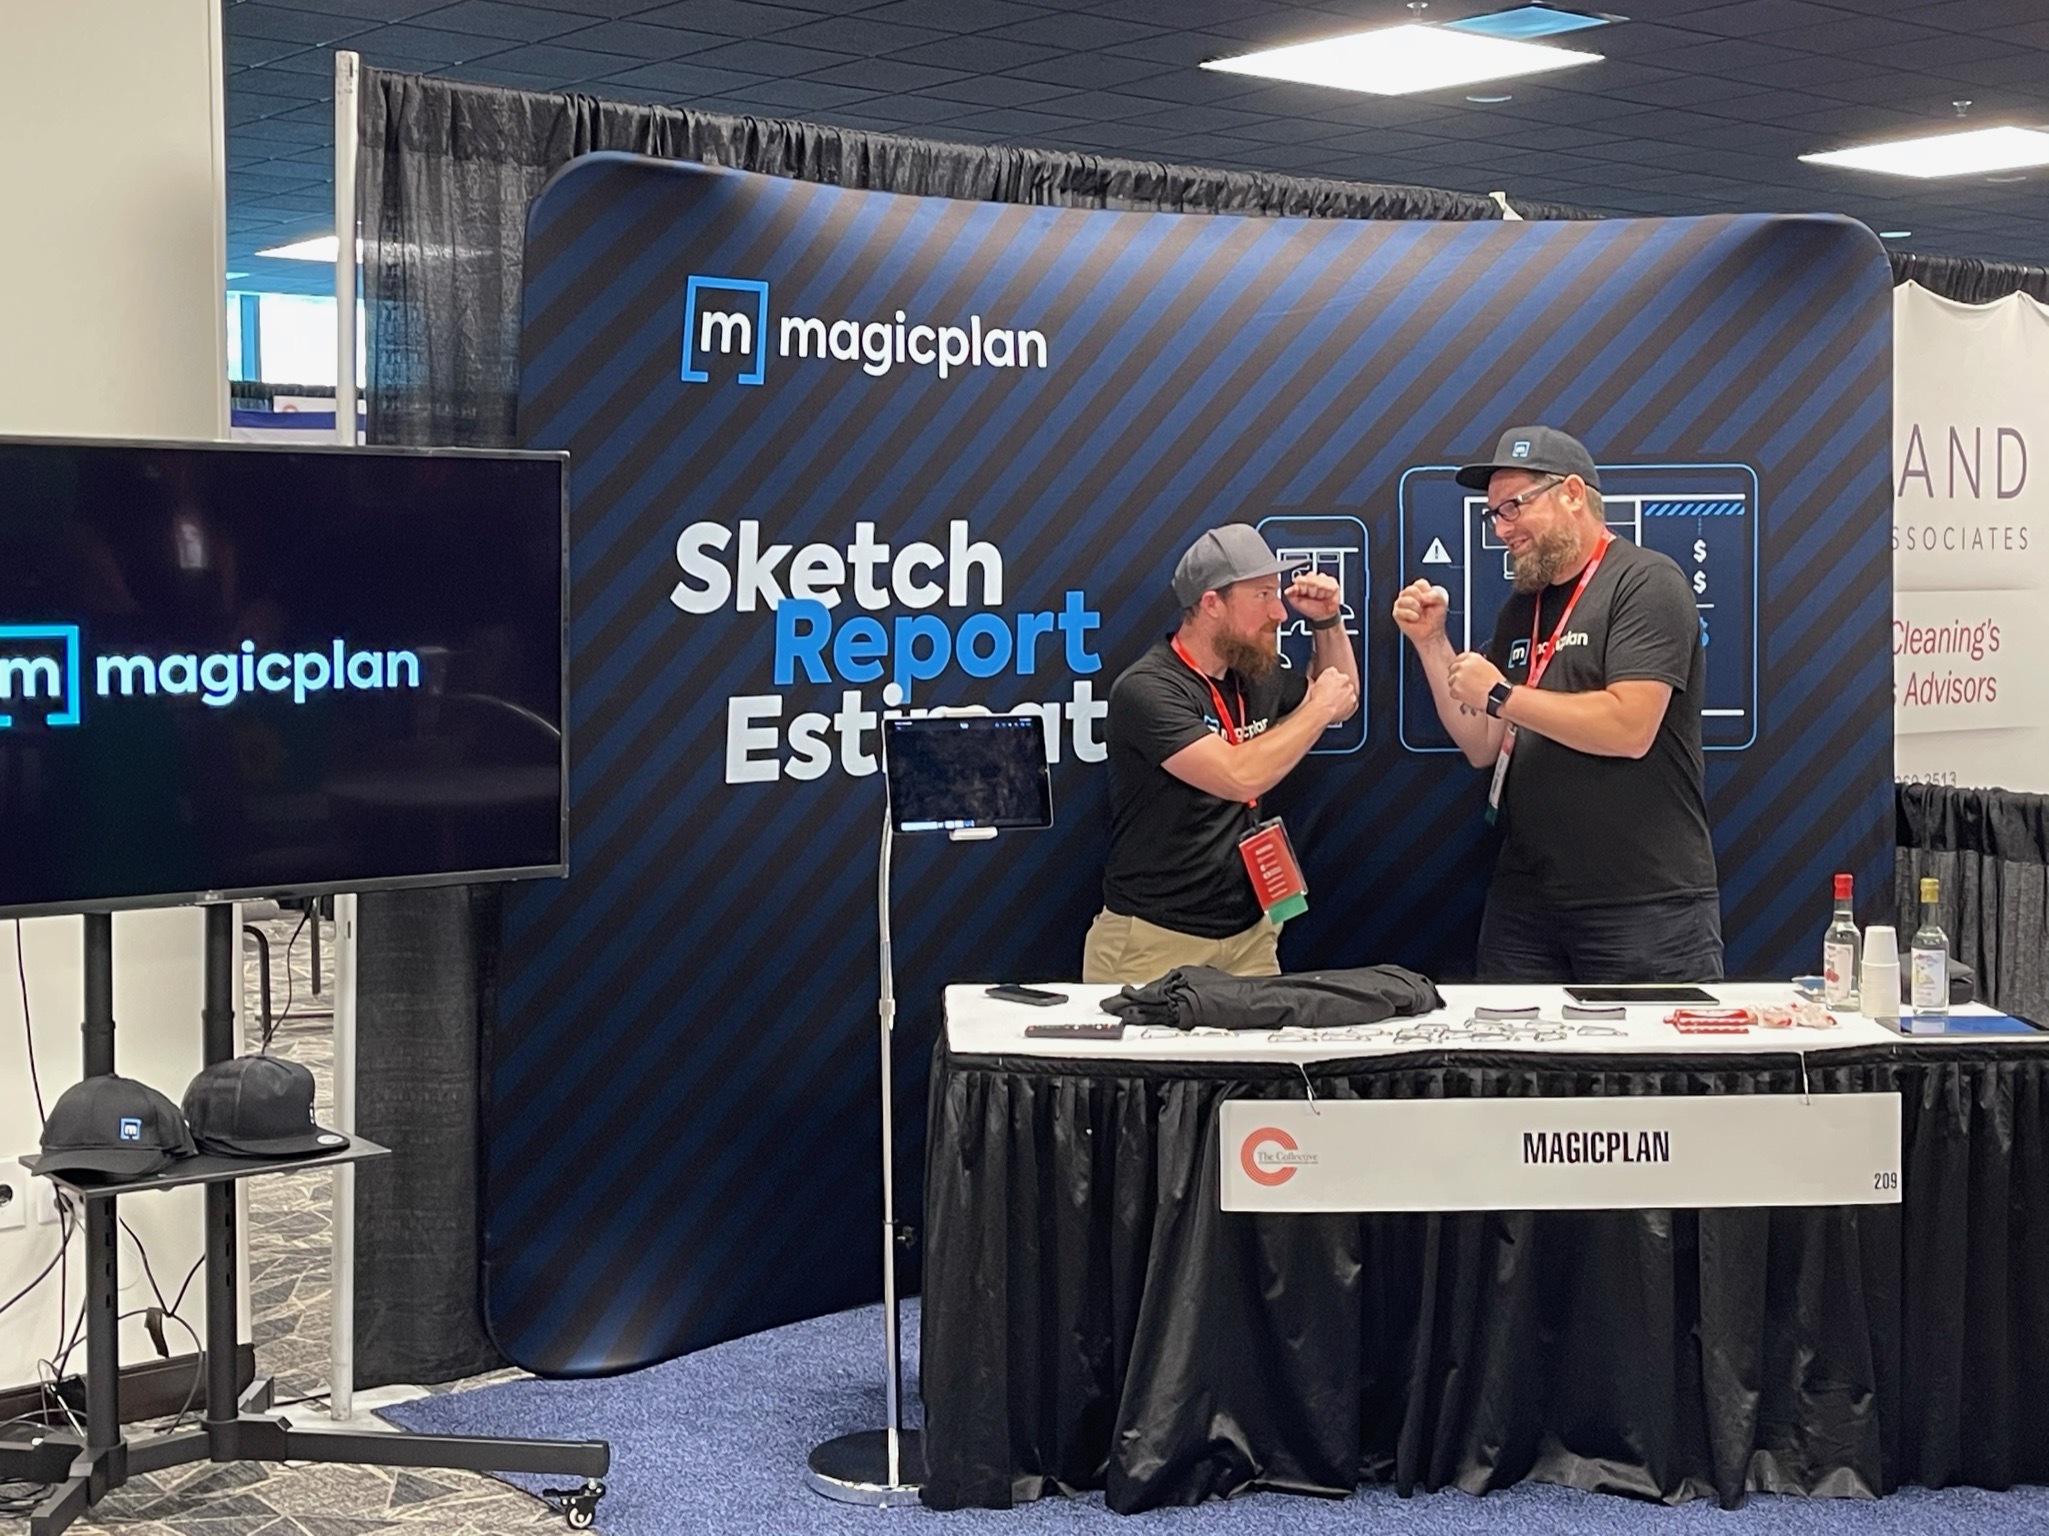 Josh Winton from Discreet Restoration and Allan Bassenden in a Restoration Industry Trade Show Behind magicplan's Booth Table Fighting. TV with the magicplan logo and banner.